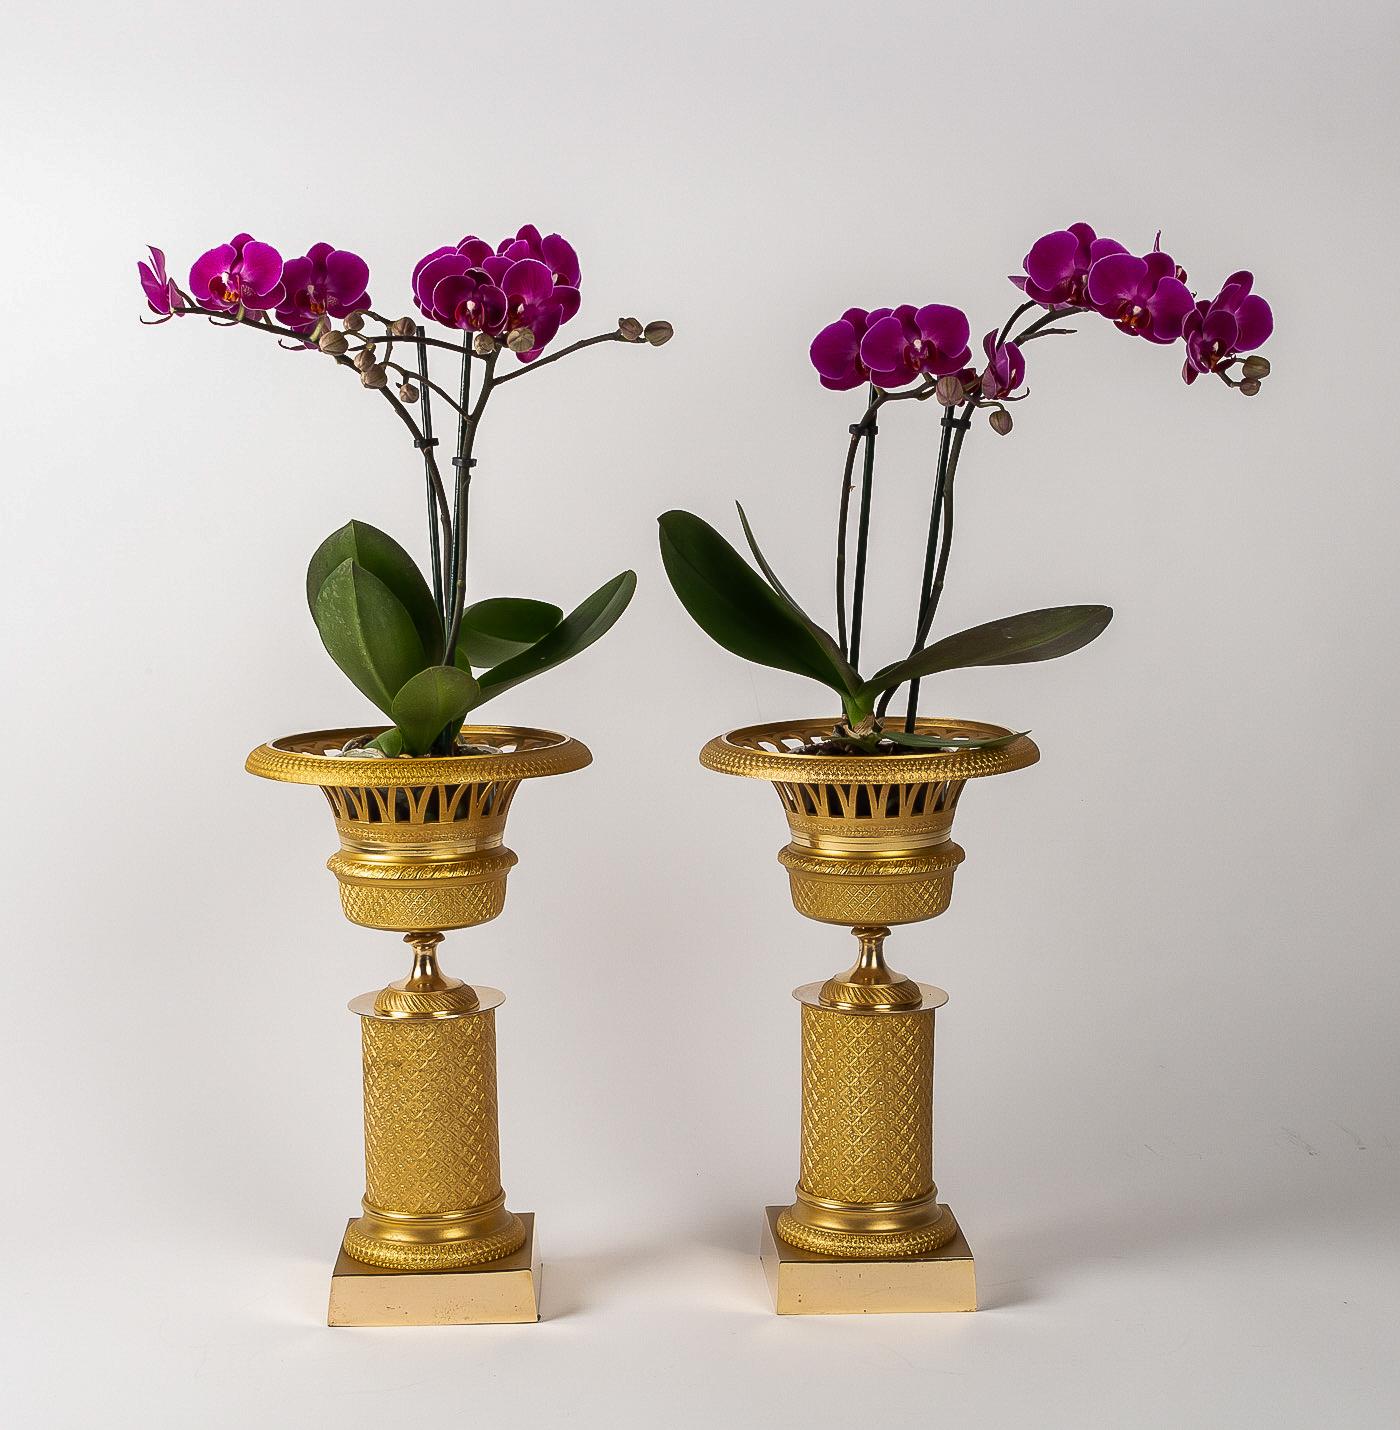 French Restoration period pair of gilt bronze cups, circa 1815-1830

Elegant pair of gilt bronze cups, finely chiseled of lattice, small flowers, and openwork foliage.
The set rests on a beautiful chiseled circular gilt bronze bases.

Lovely French